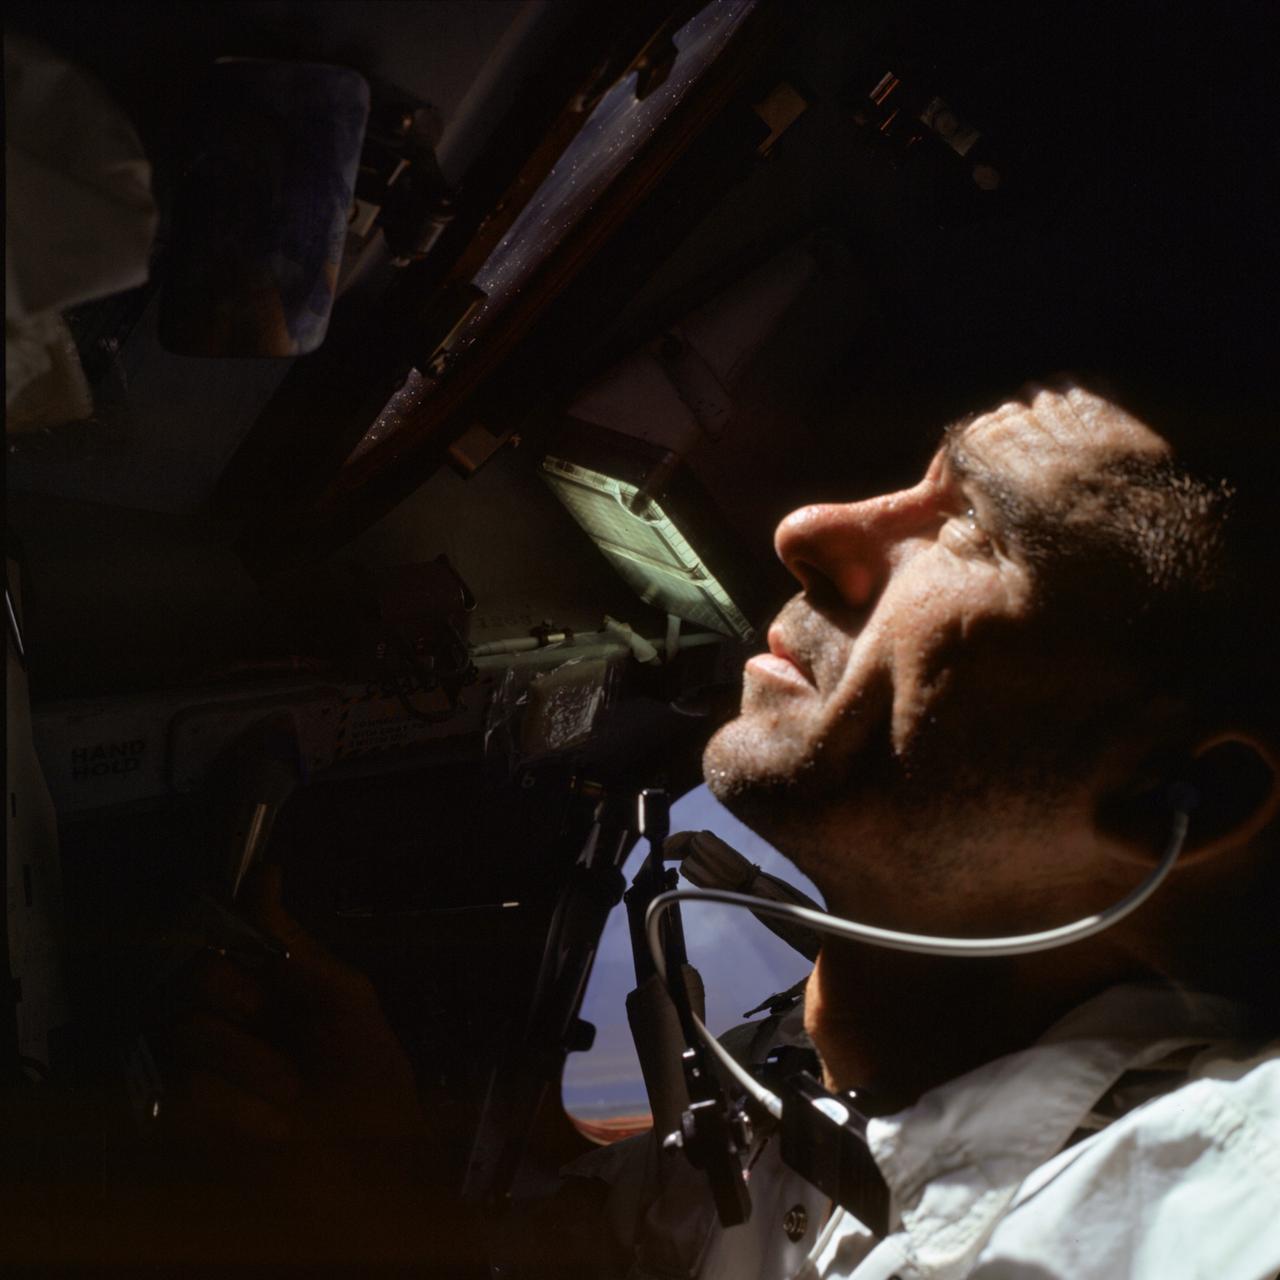 Apollo 7 lunar module pilot Water Cunningham during the mission.